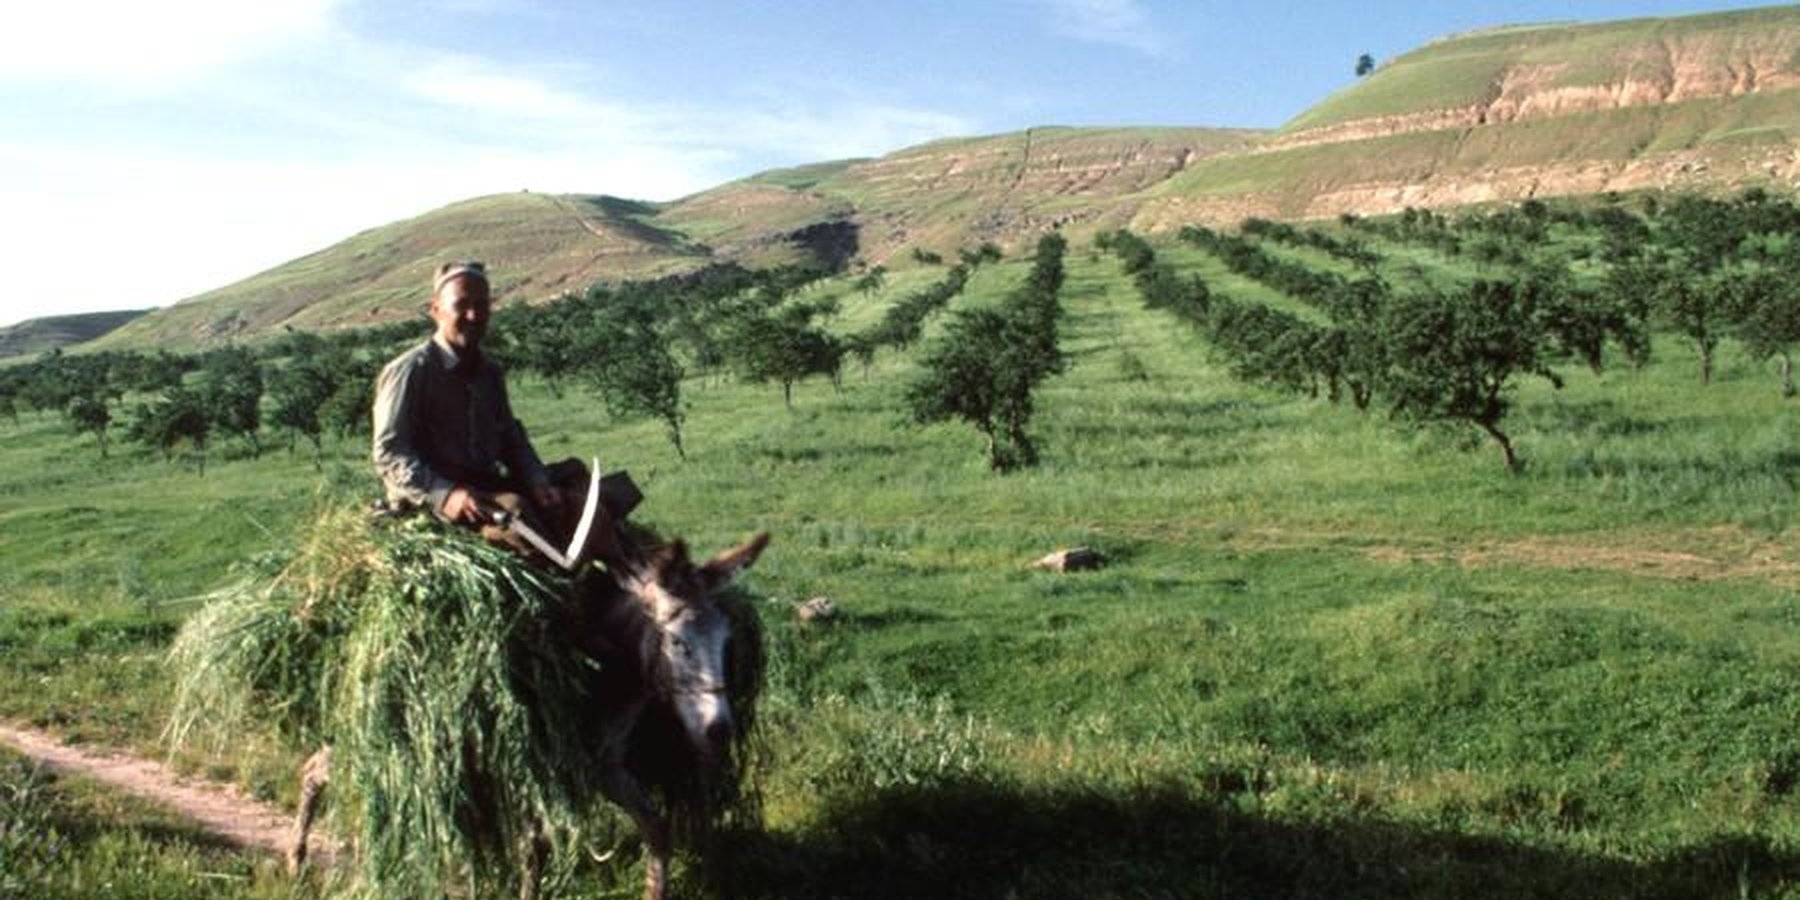 Farmer bringing fodder home from the field: grass is cut between the fruit trees